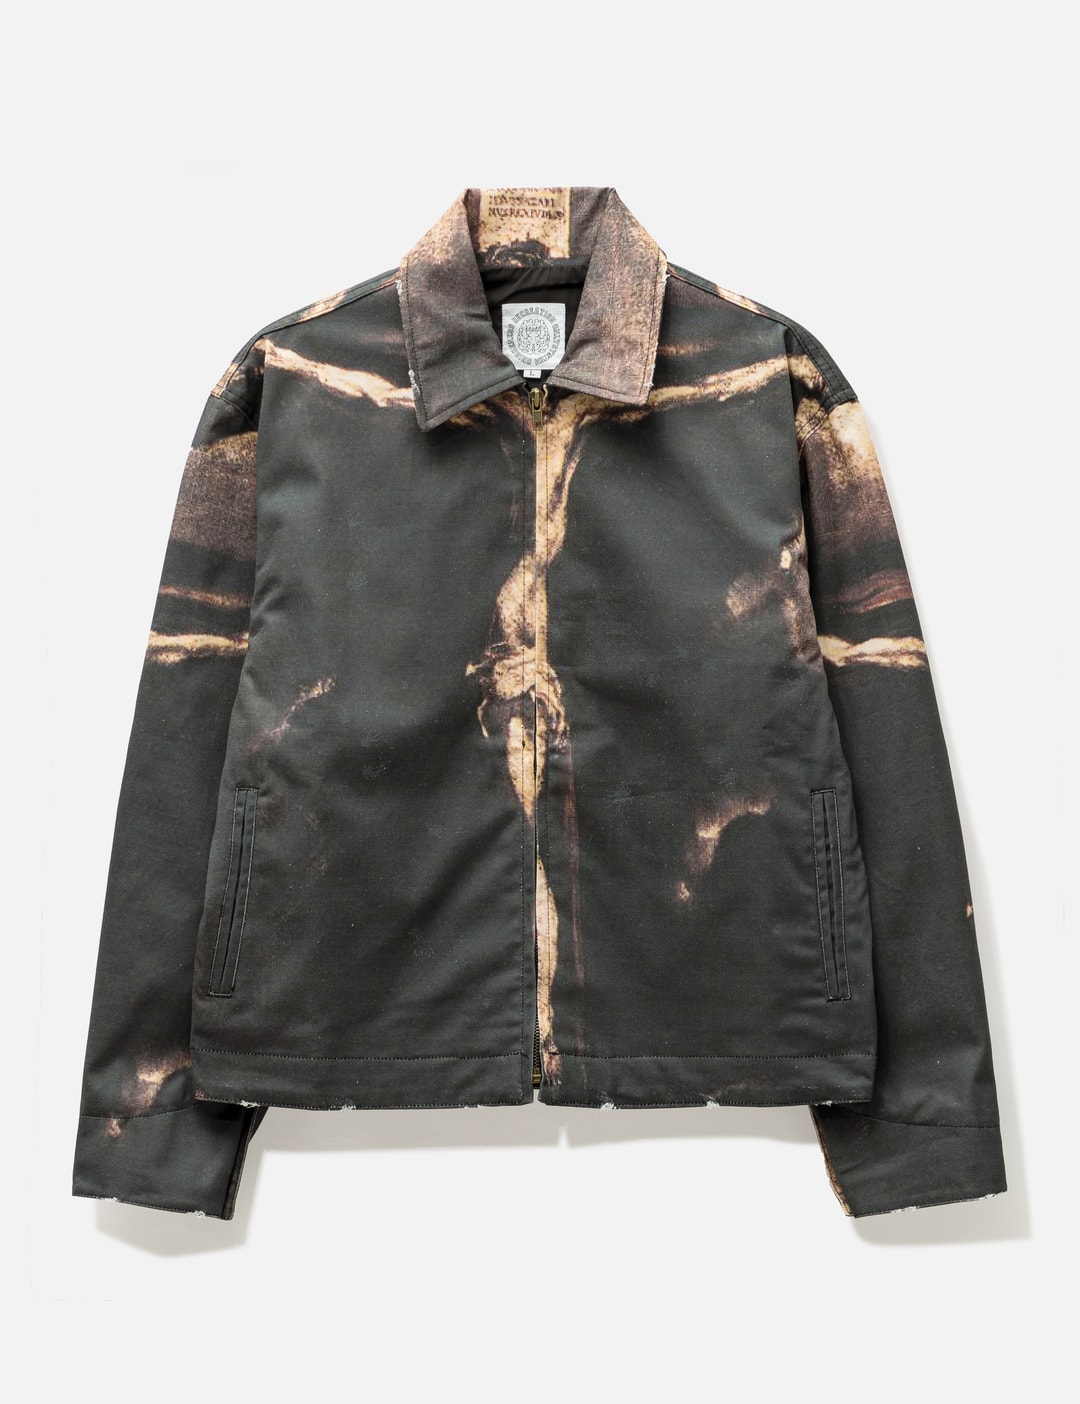 Someit - SOLVER Vintage Jacket | HBX - Globally Curated Fashion and ...